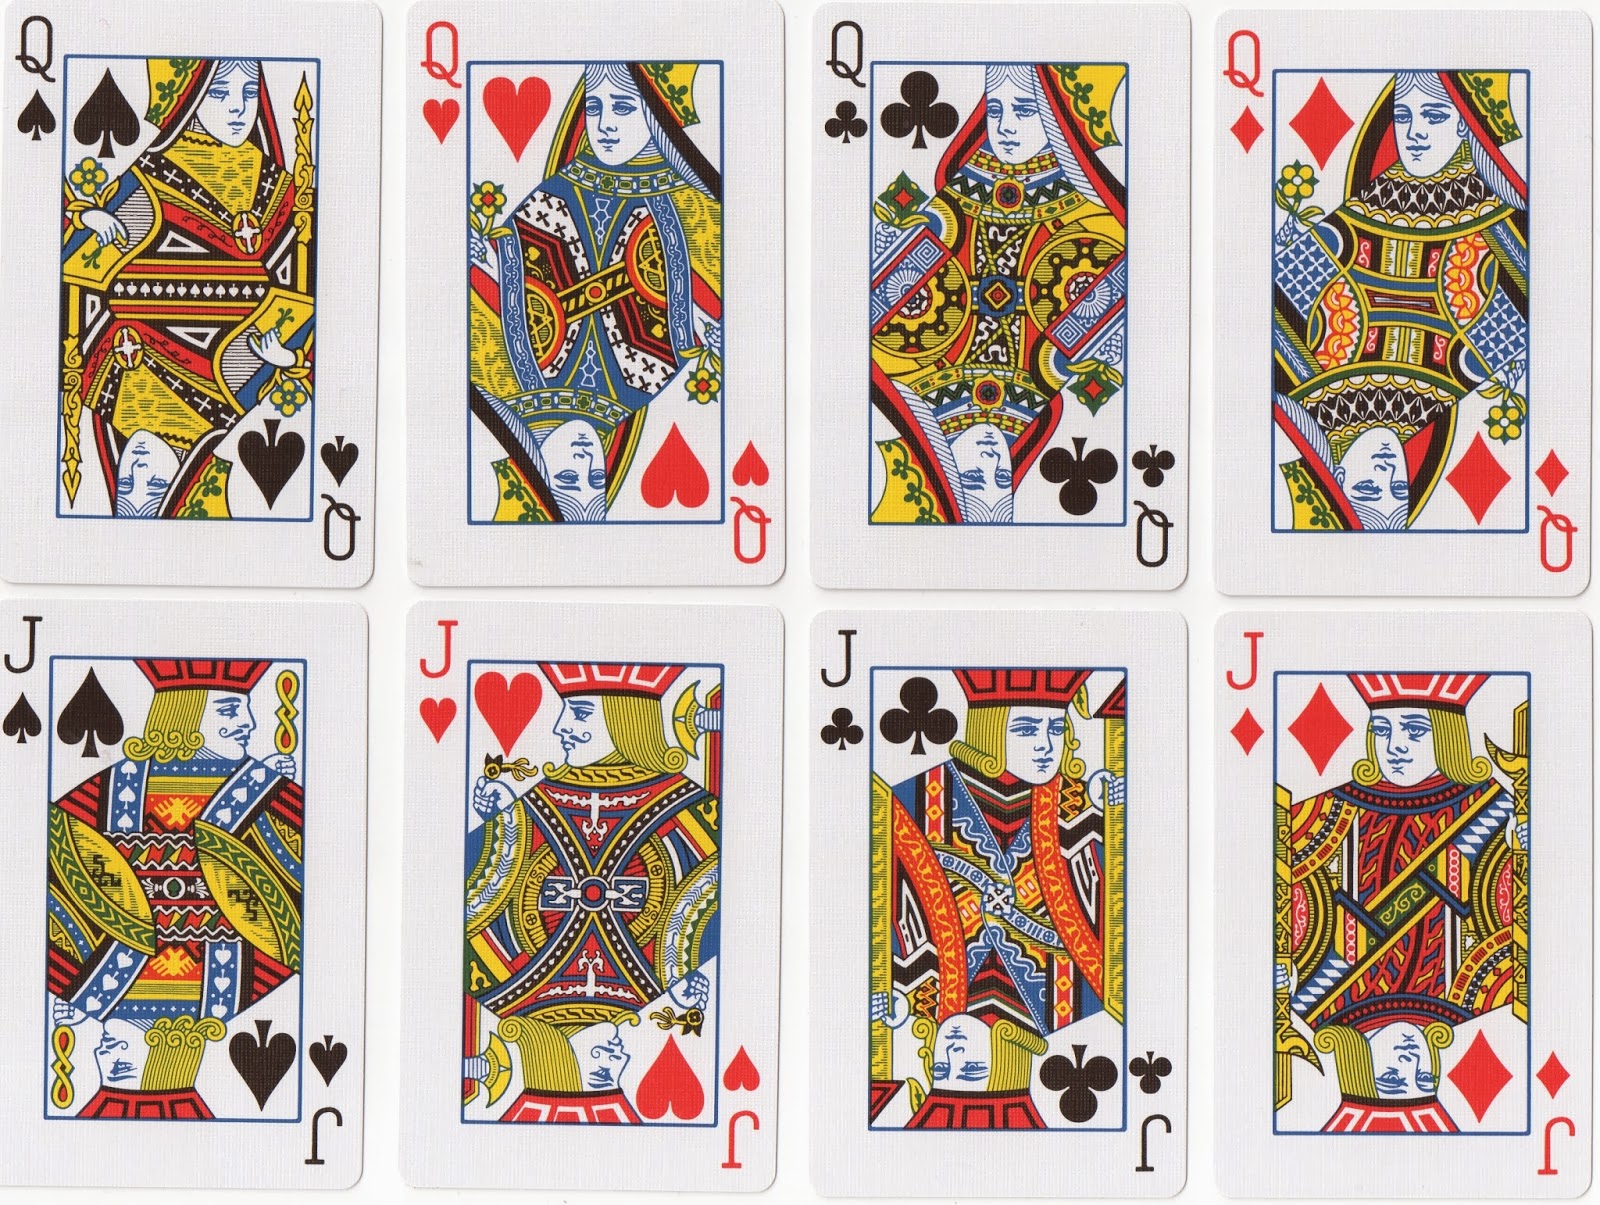 33: functional changes to playing cards revised 14.10.13.